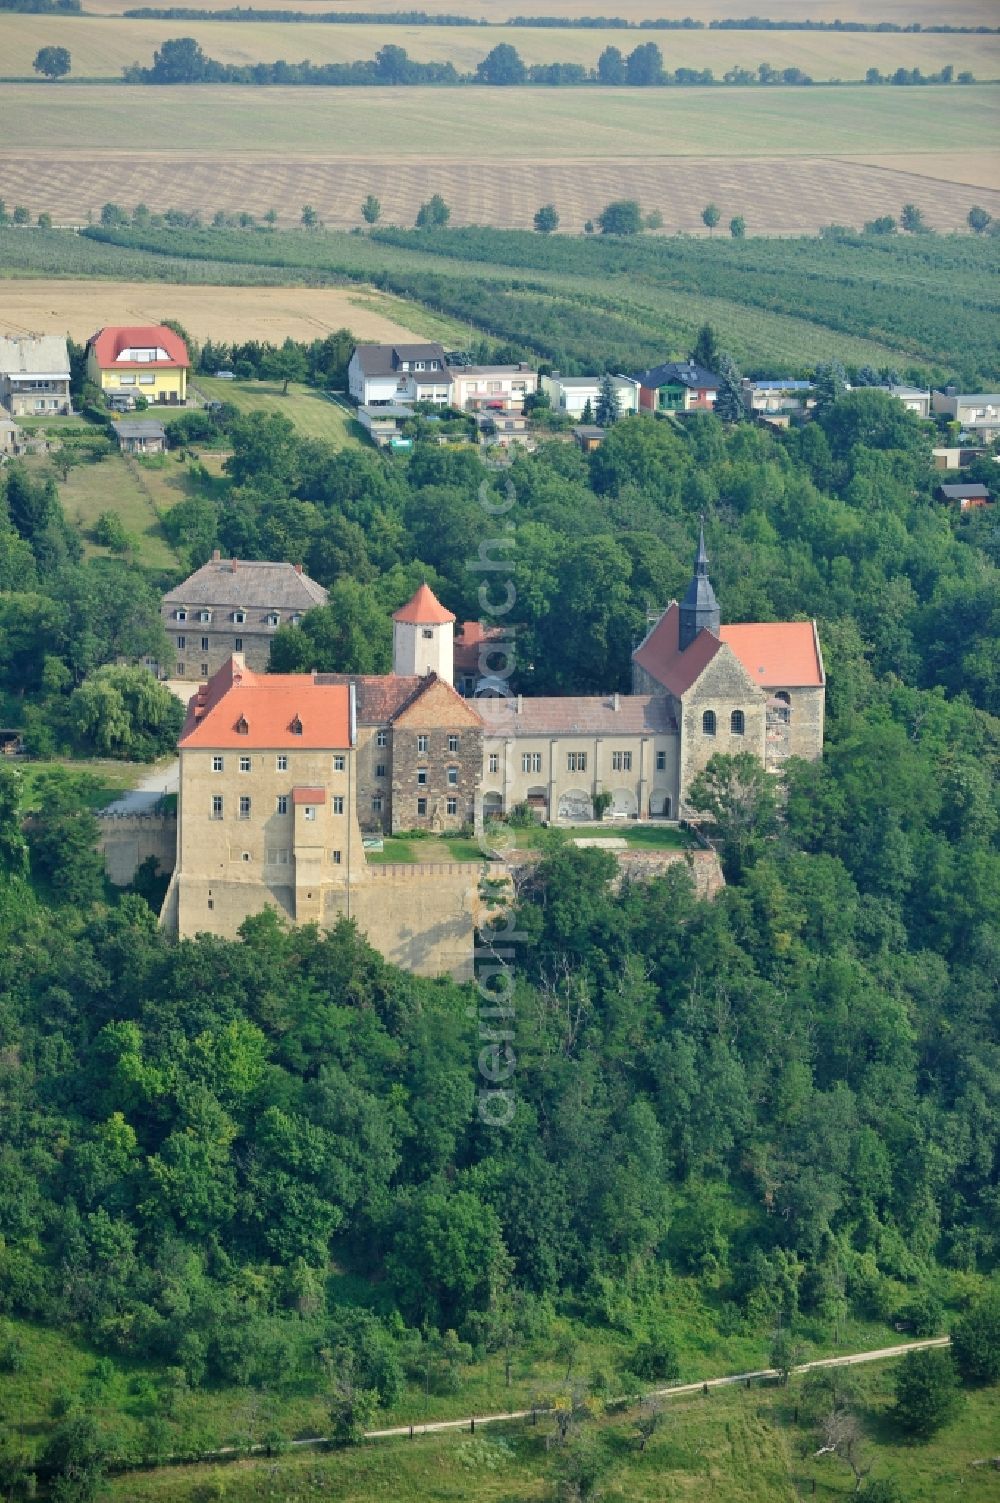 Aerial image Goseck - View of the castle Goseck in the homonymous city in Saxony-Anhalt. The medieval castle and abbey was built in the 9th Century and is now used by Schloss Goseck e.V. The association, which was founded in 1998, started its business on the European music and culture center, and organizes concerts. There are also guest rooms, a castle-tavern and information spaces for Goseck solar observatory since 2006